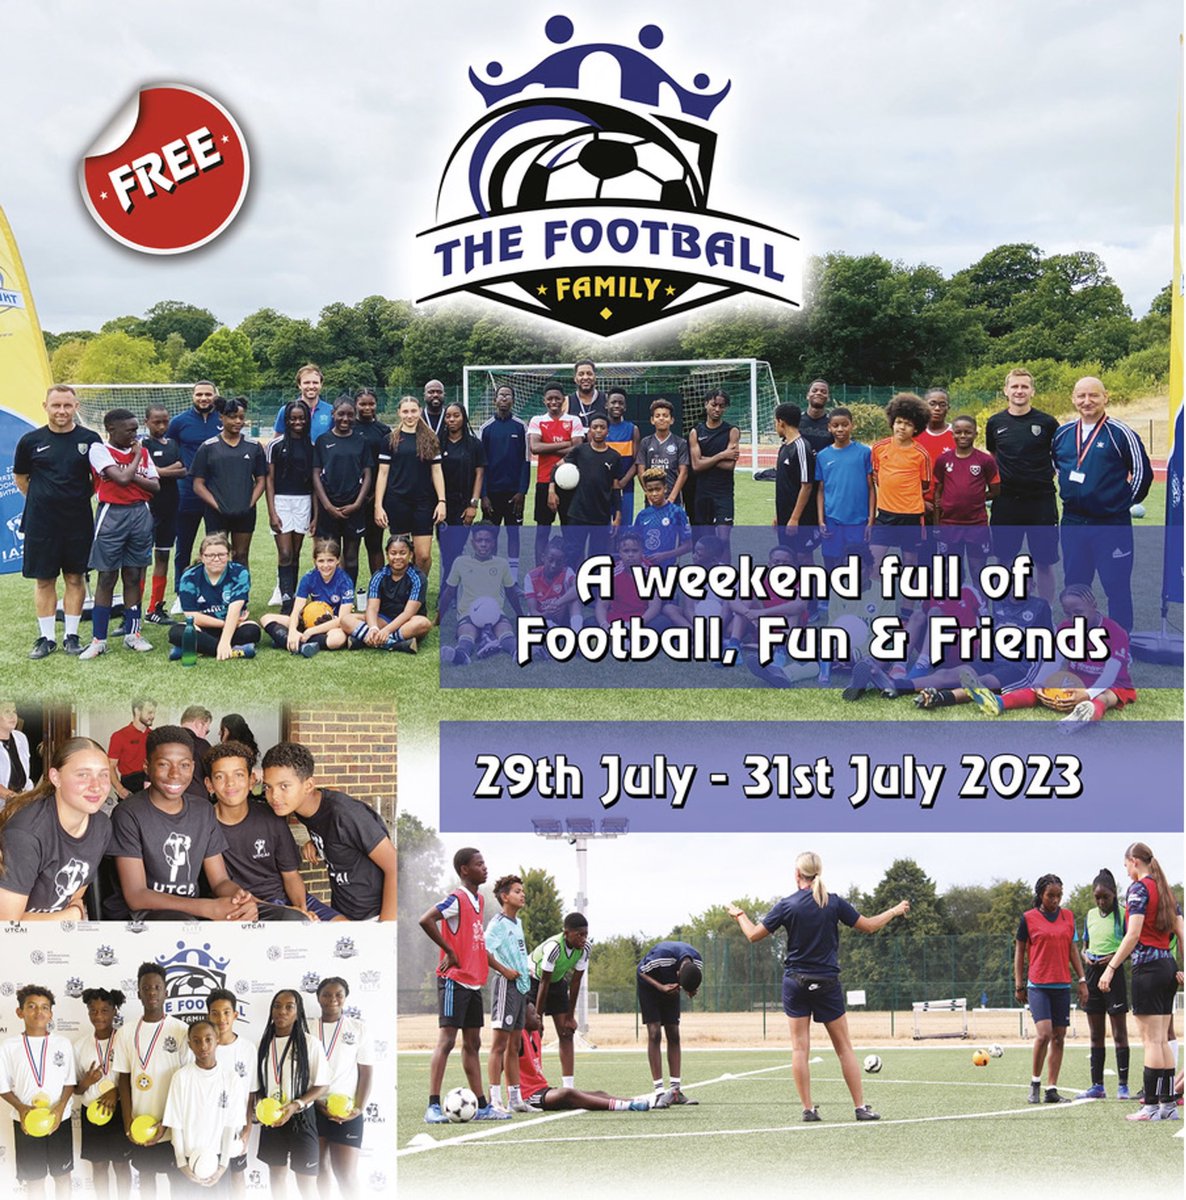 Football Family 2023 is back! Working in collaboration with @UTCAI_ @EliteFootballDC @FTYFLYUK for our second football themed residential @isc @isa @PalaceForLife #powerofpartnerships